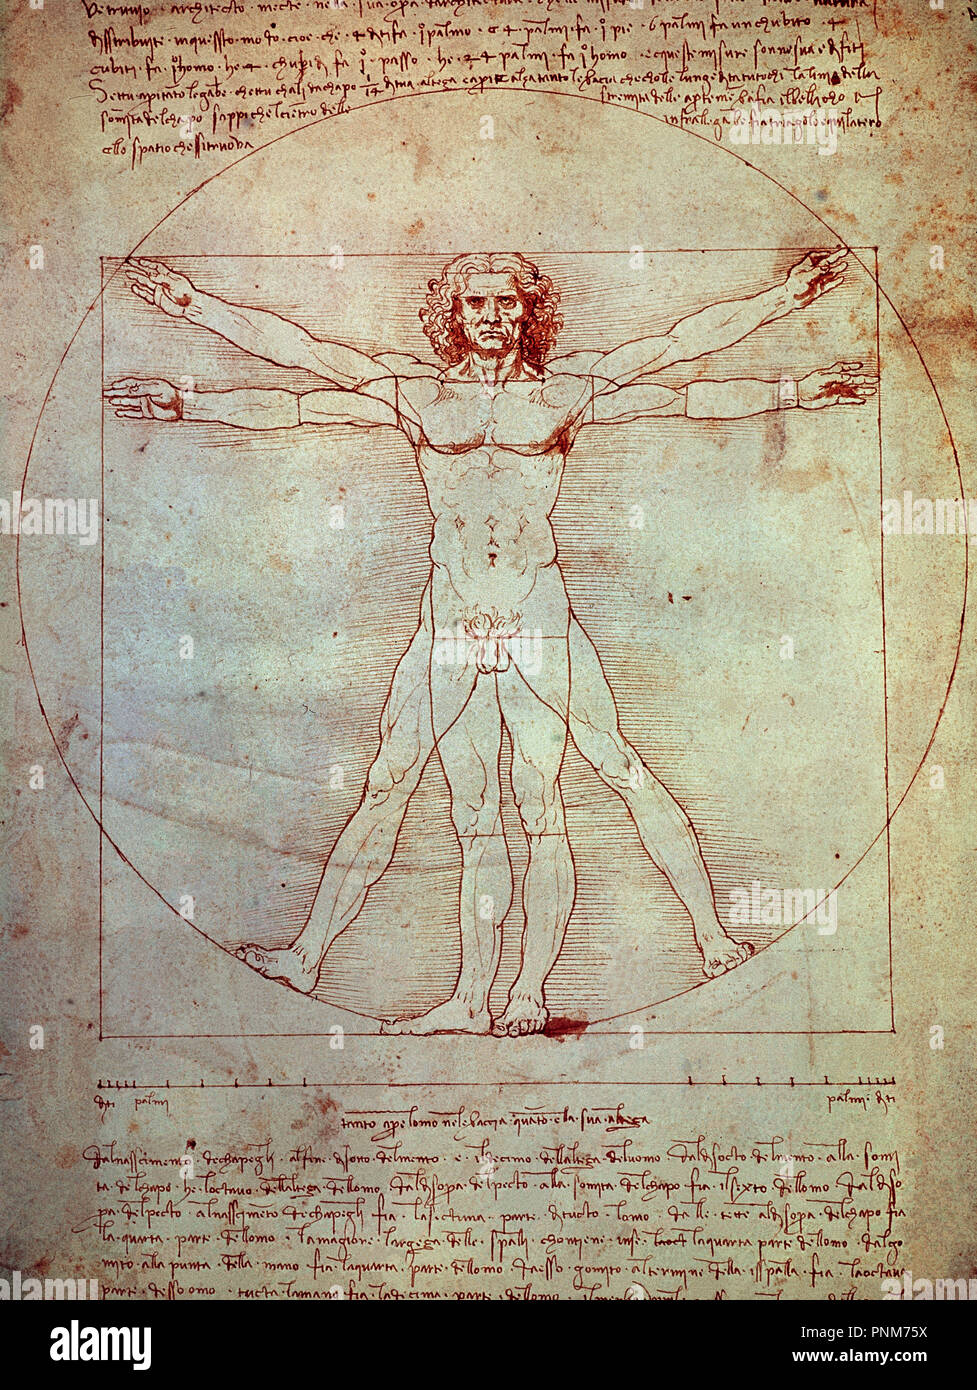 Leonardo da Vinci and the Science of Art – Canvas by New Masters Academy